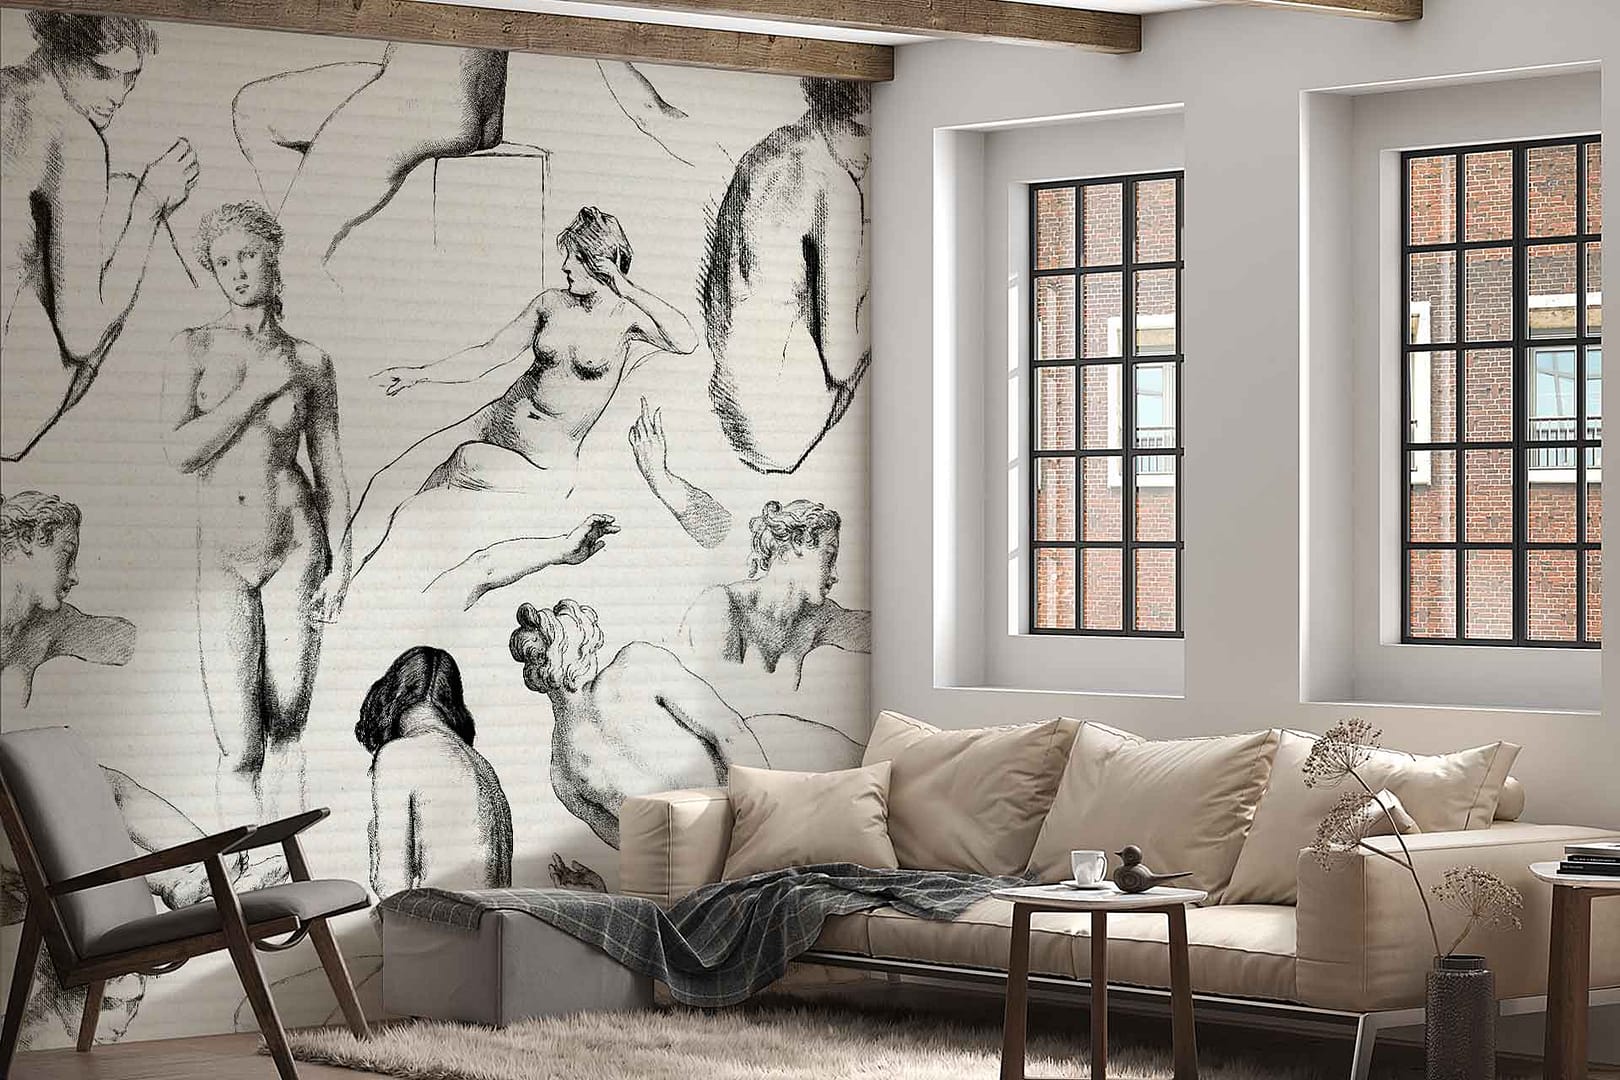 Hold Still Please - A wallpaper made up of various artistic hand drawn female figures by Cara Saven Wall Design